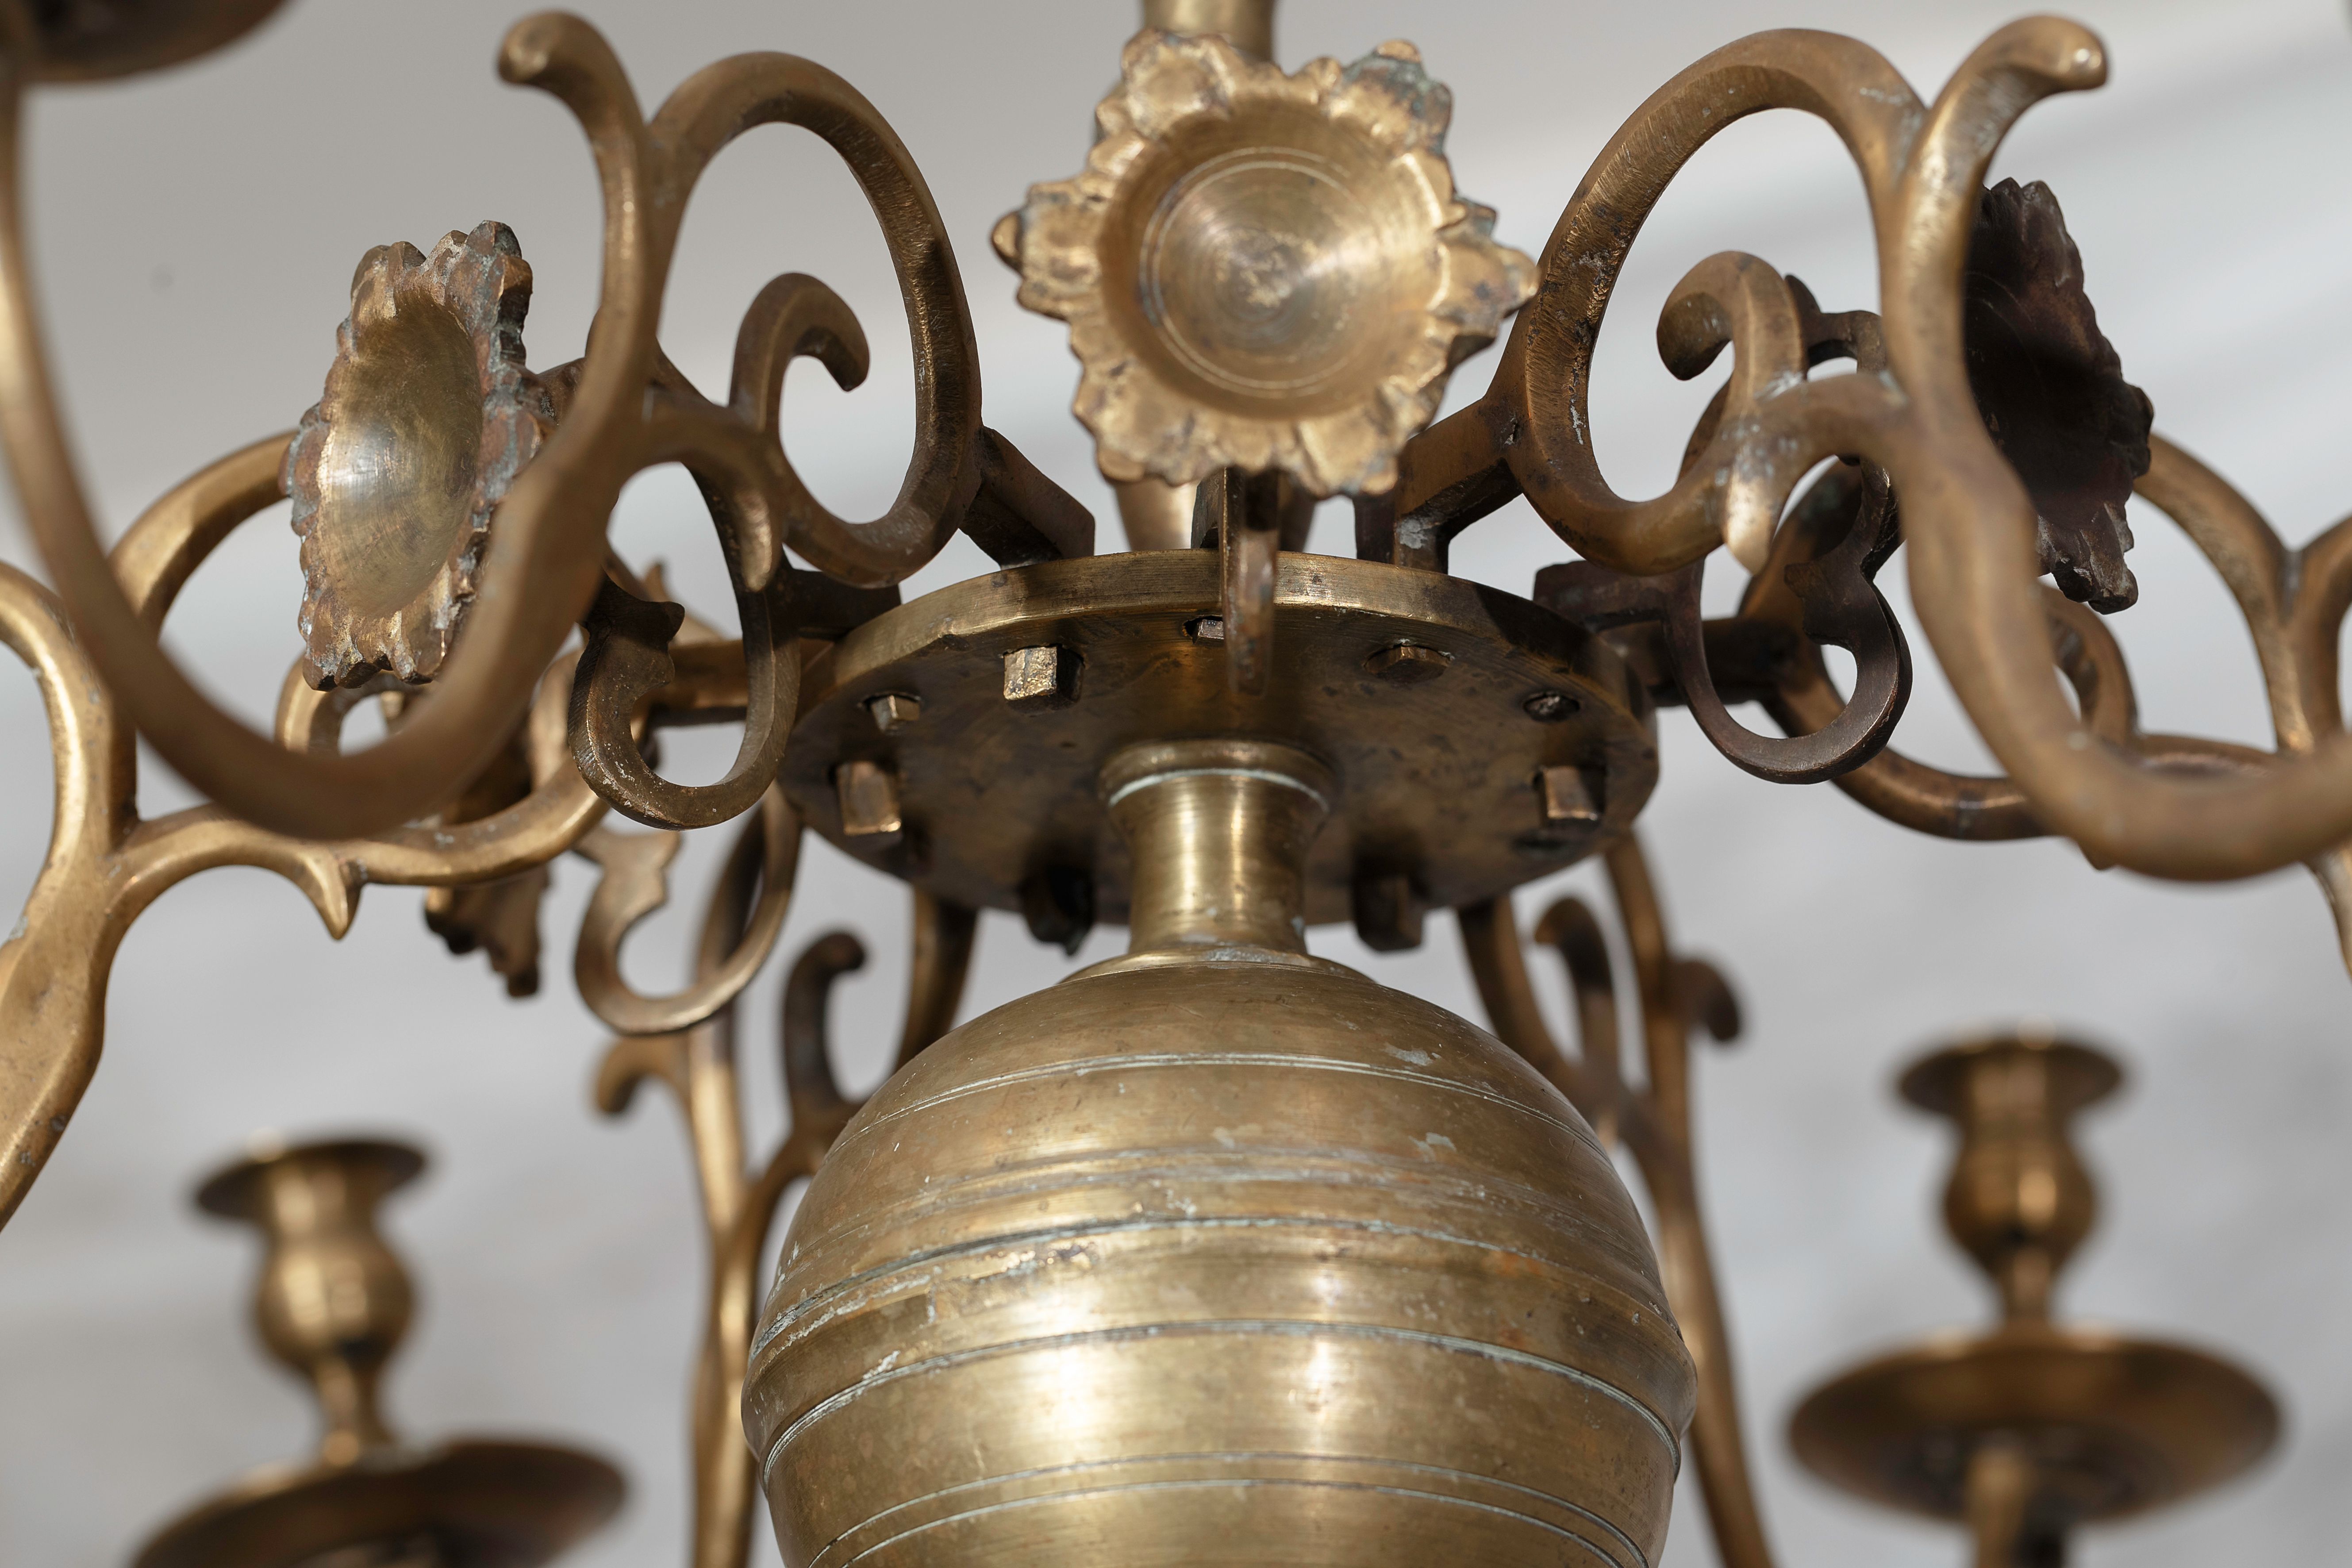 A fragment of the chandelier, the late 18th – 19th century, the National M. K. Čiurlionis Museum of Art, Tt-9556. Photo by Povilas Jarmala, 2019